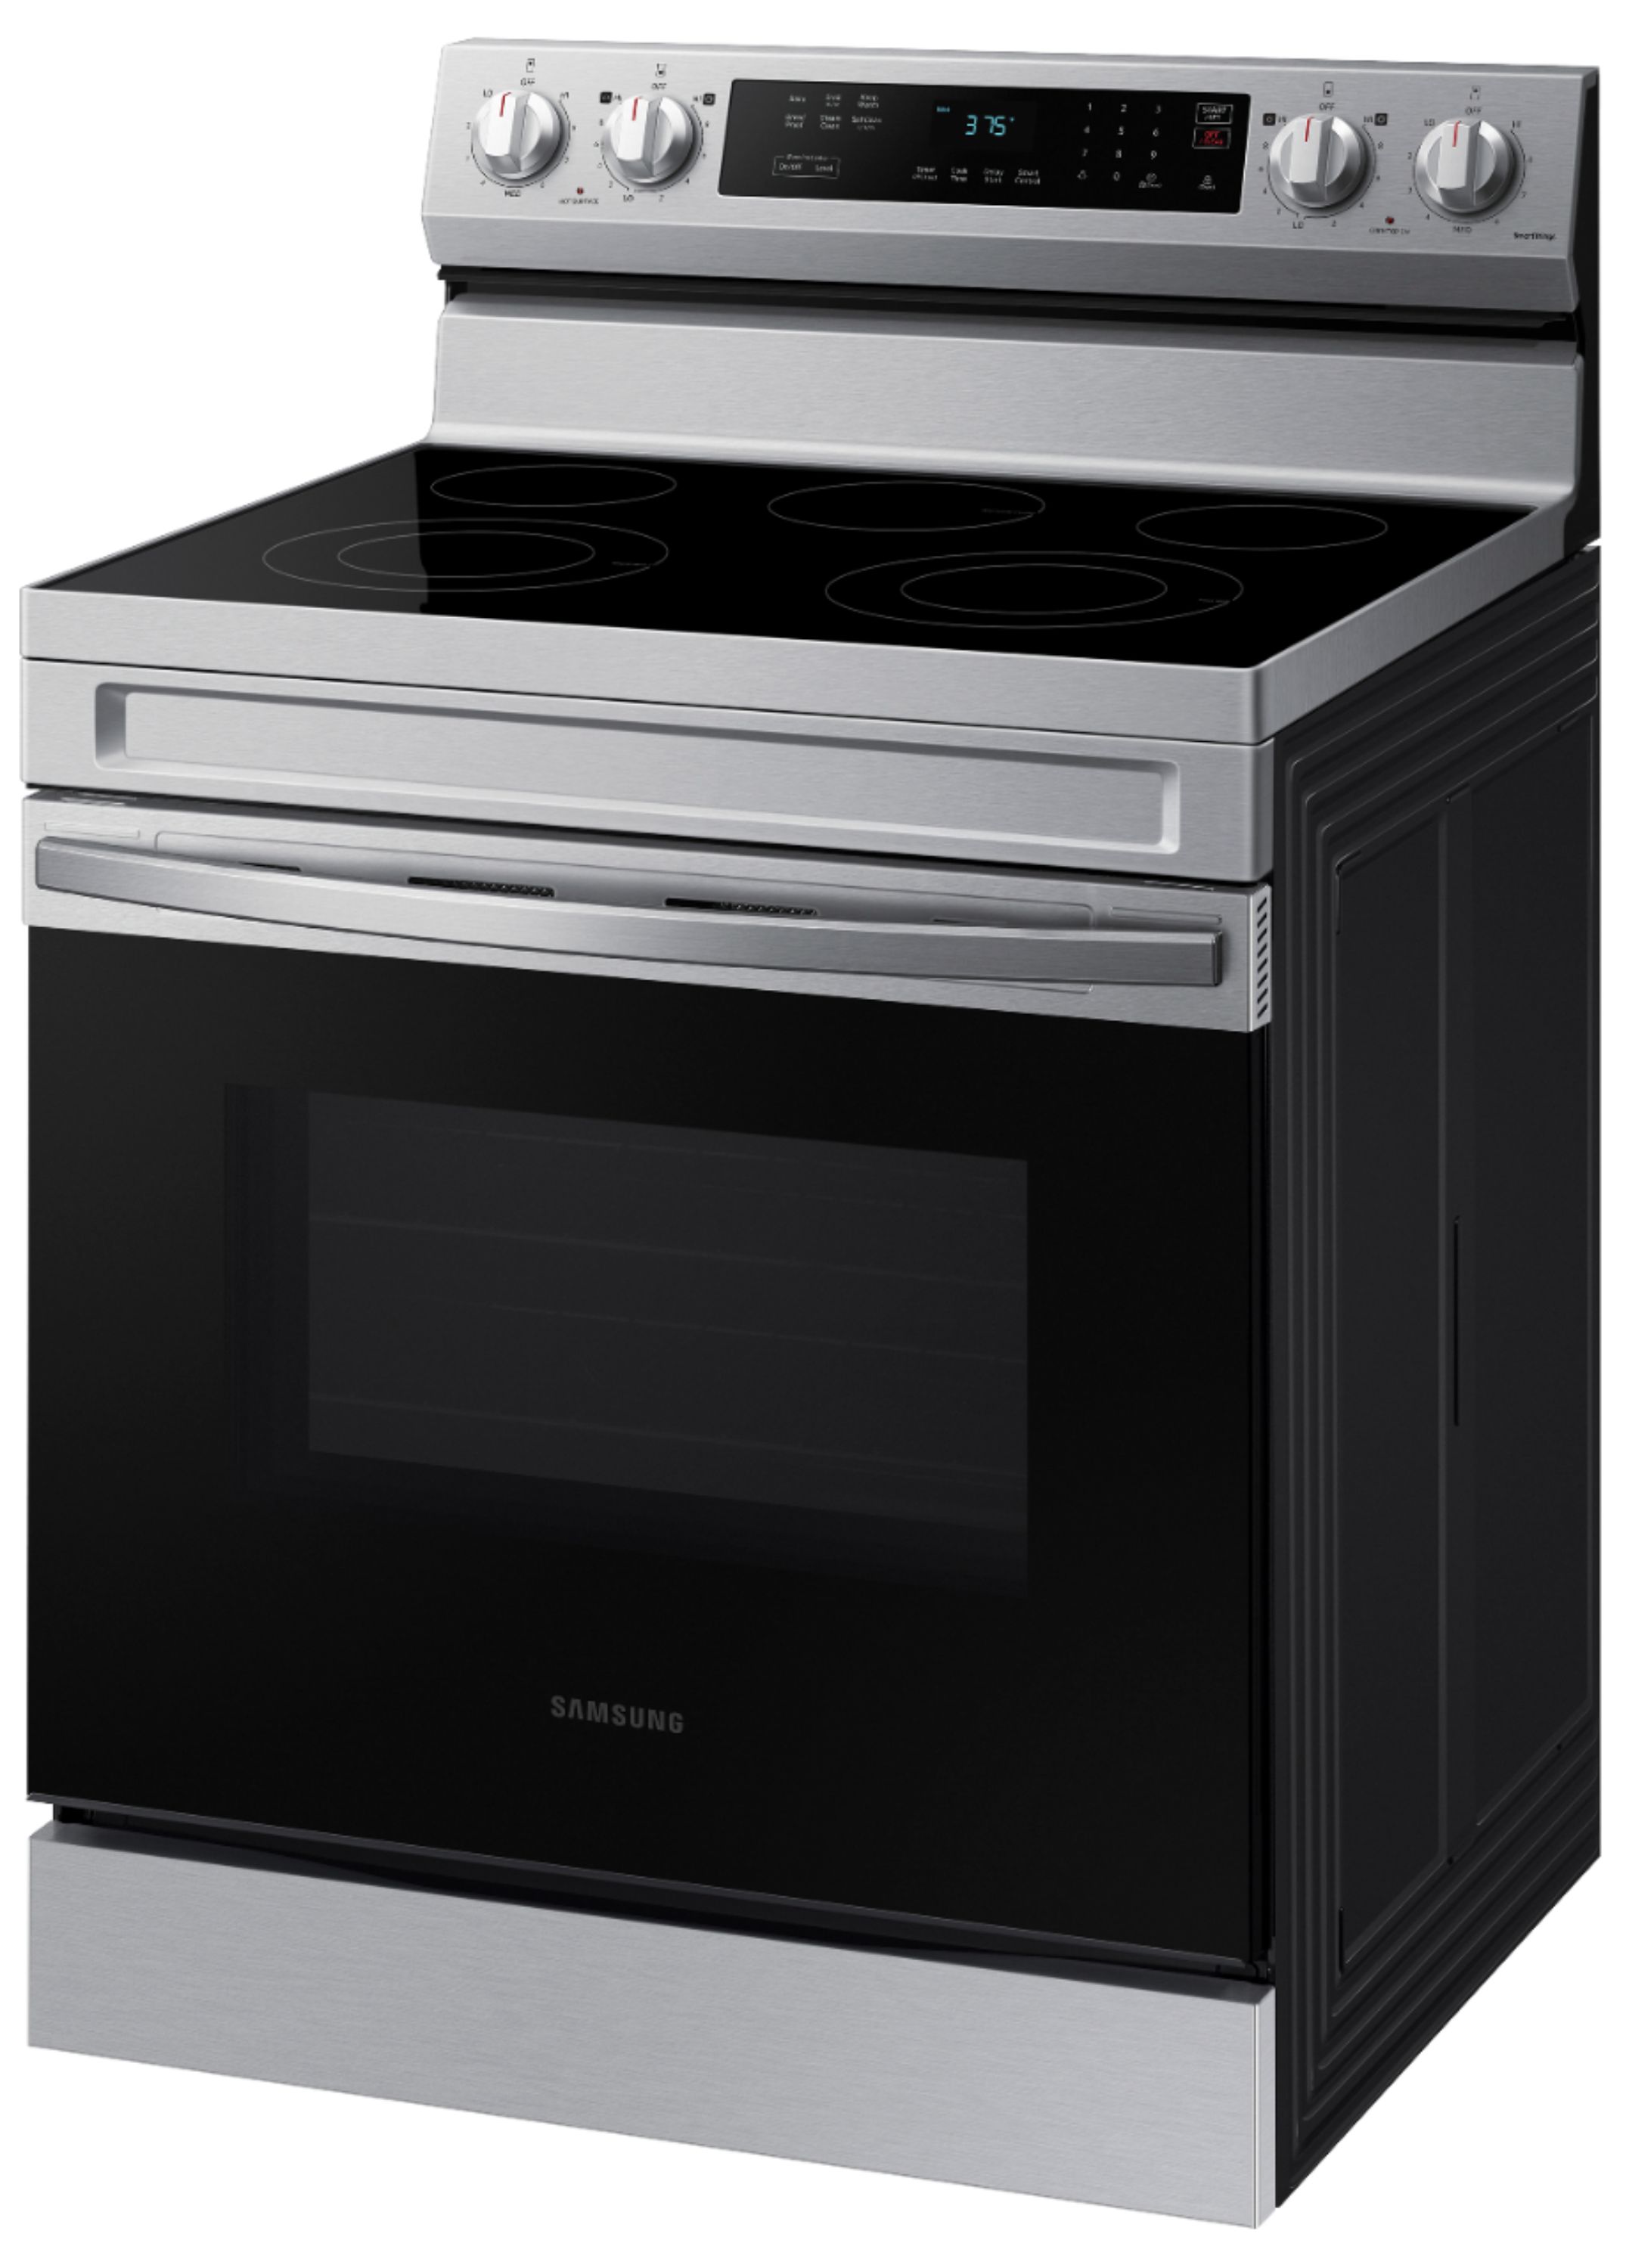 samsung-stove-electric-for-sale-off-65